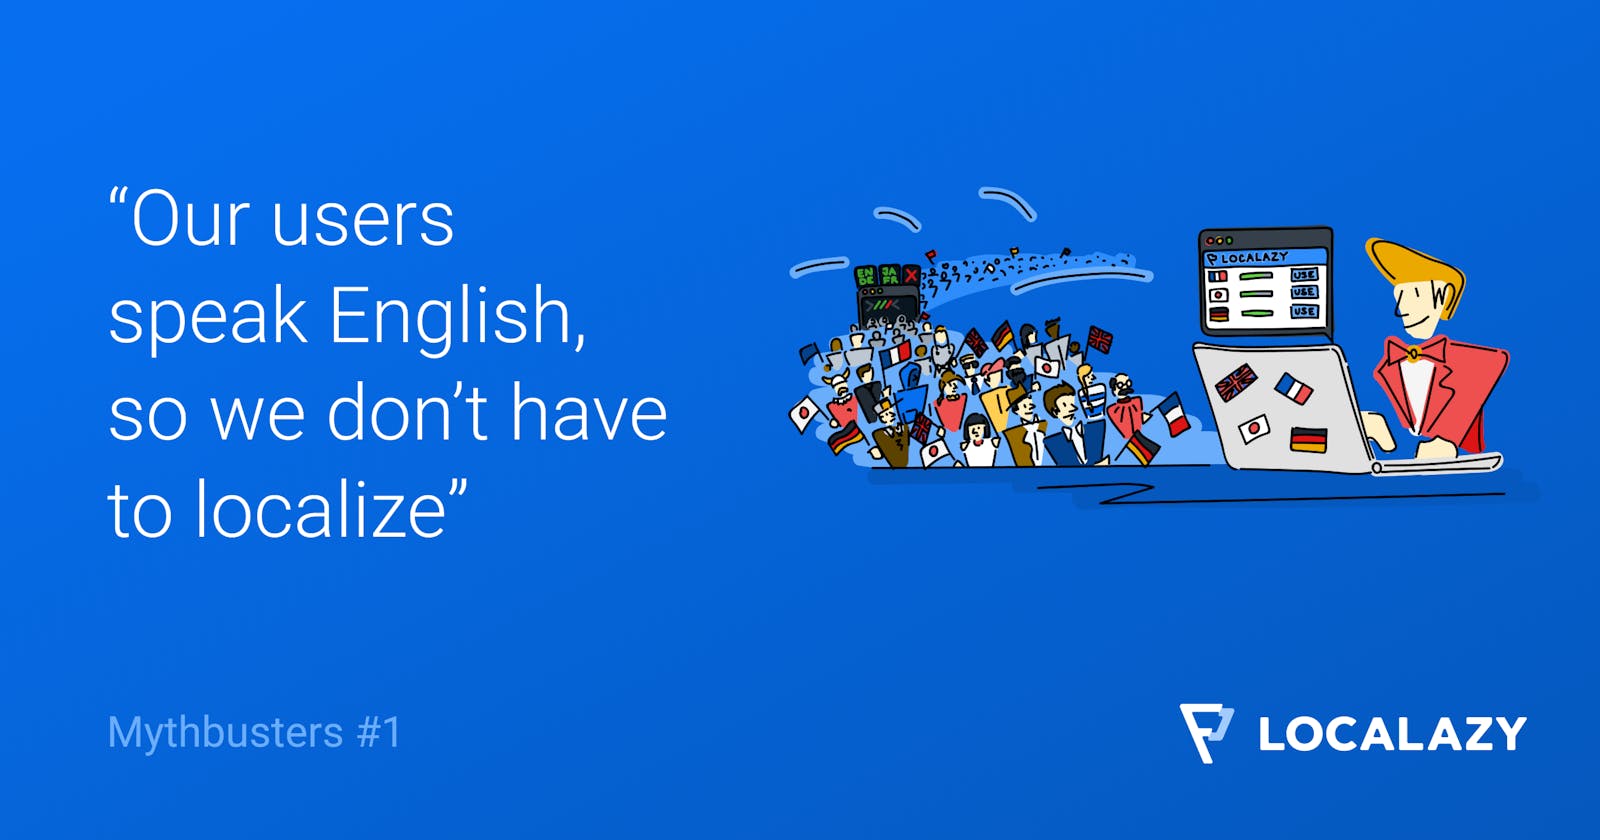 Mythbusters: Our users speak English, so we don’t have to localize